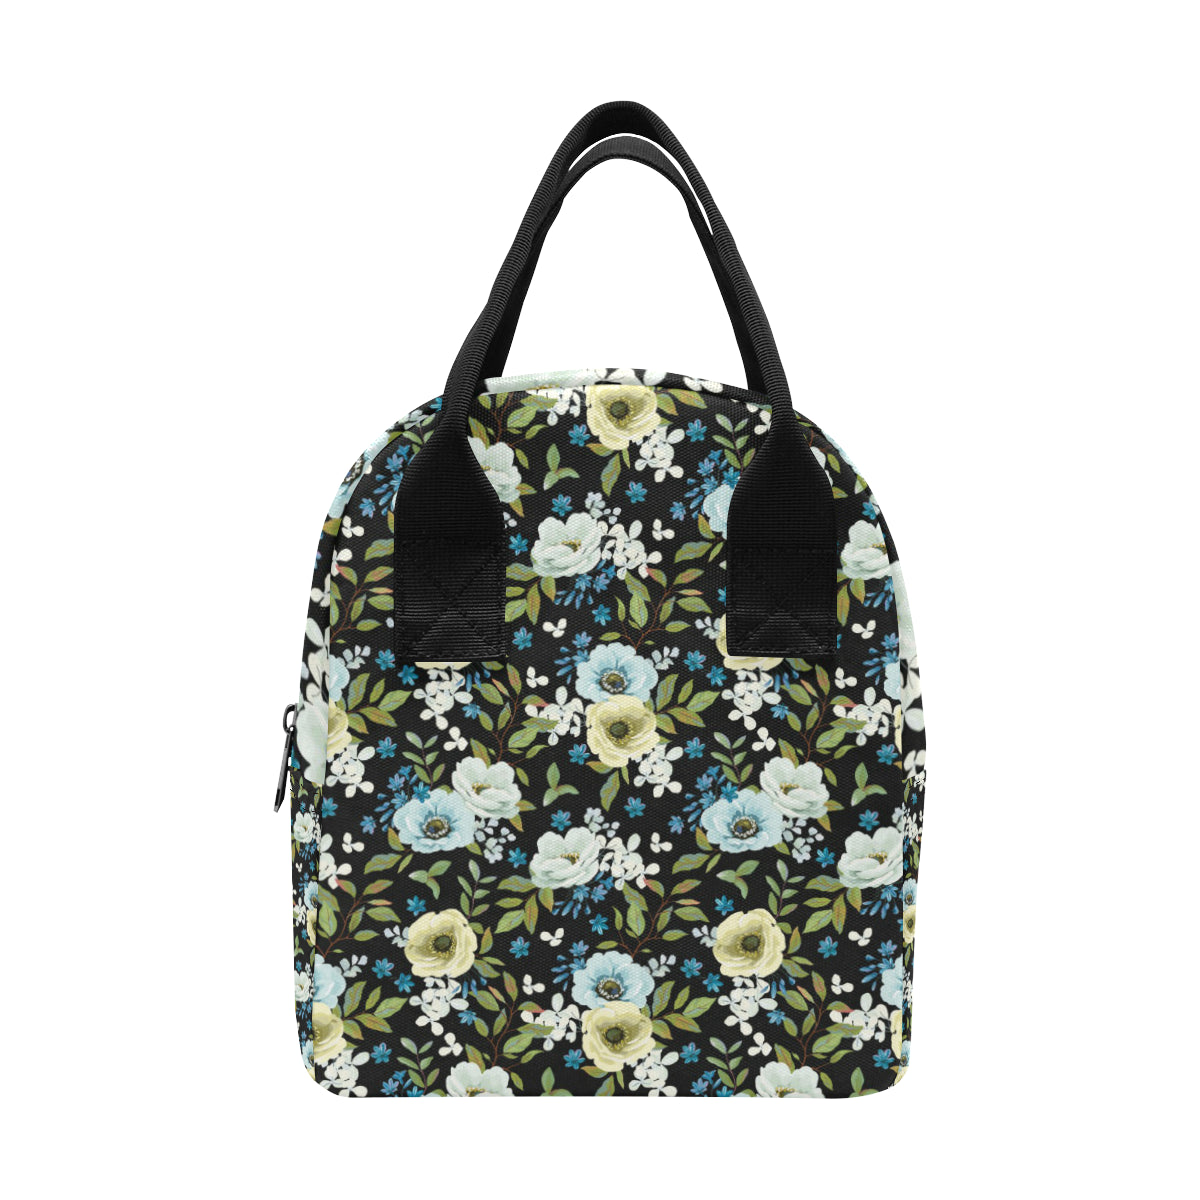 Anemone Pattern Print Design AM03 Insulated Lunch Bag